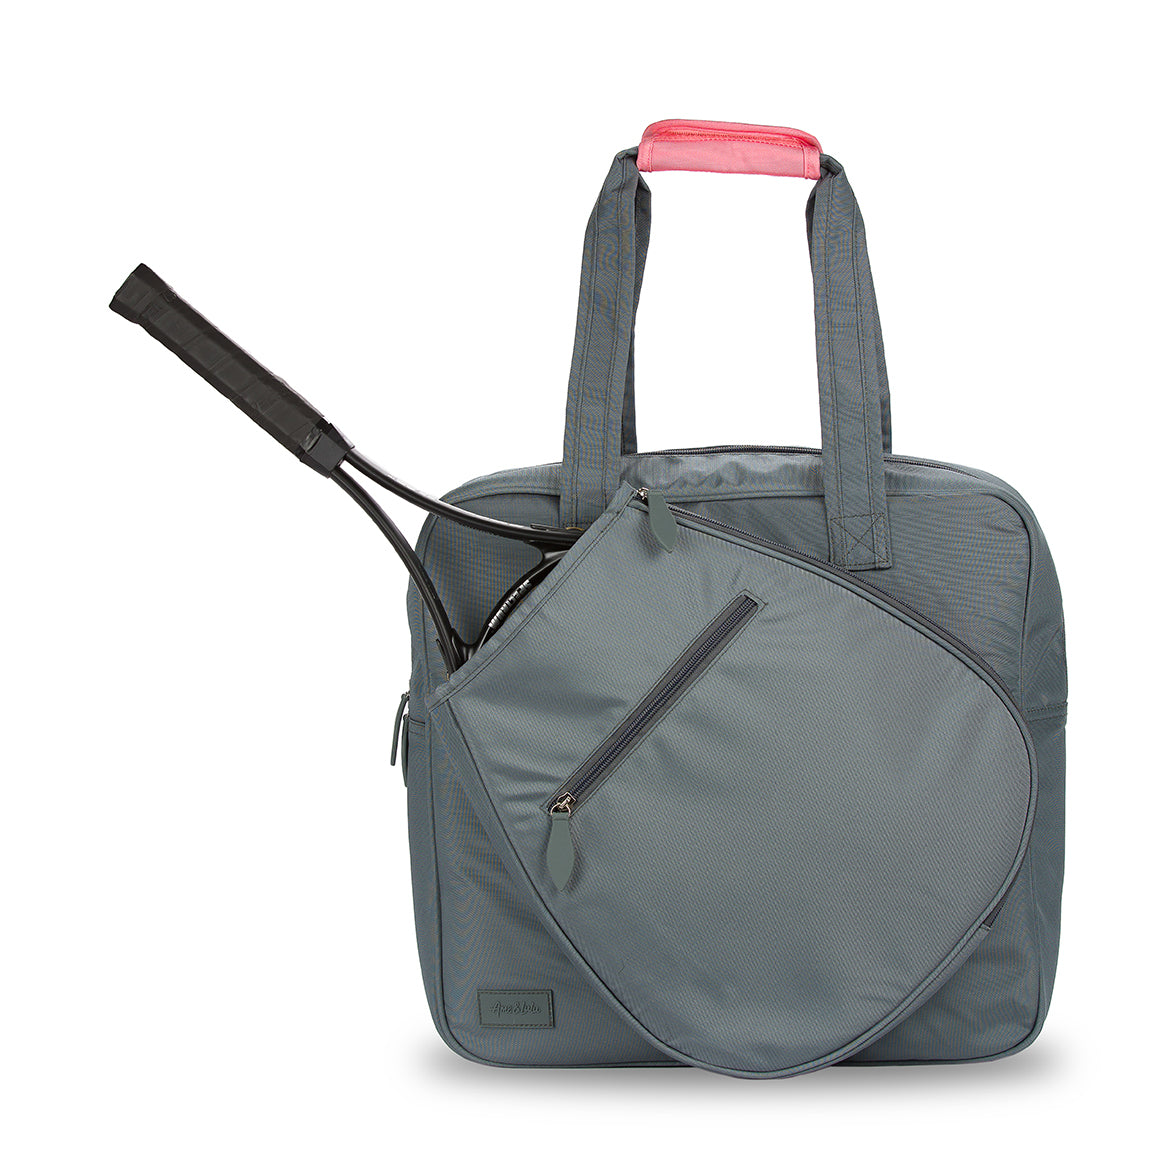 Front view of charcoal grey tennis tote with tennis racquet in front pocket. Tote has coral pink handle cap.